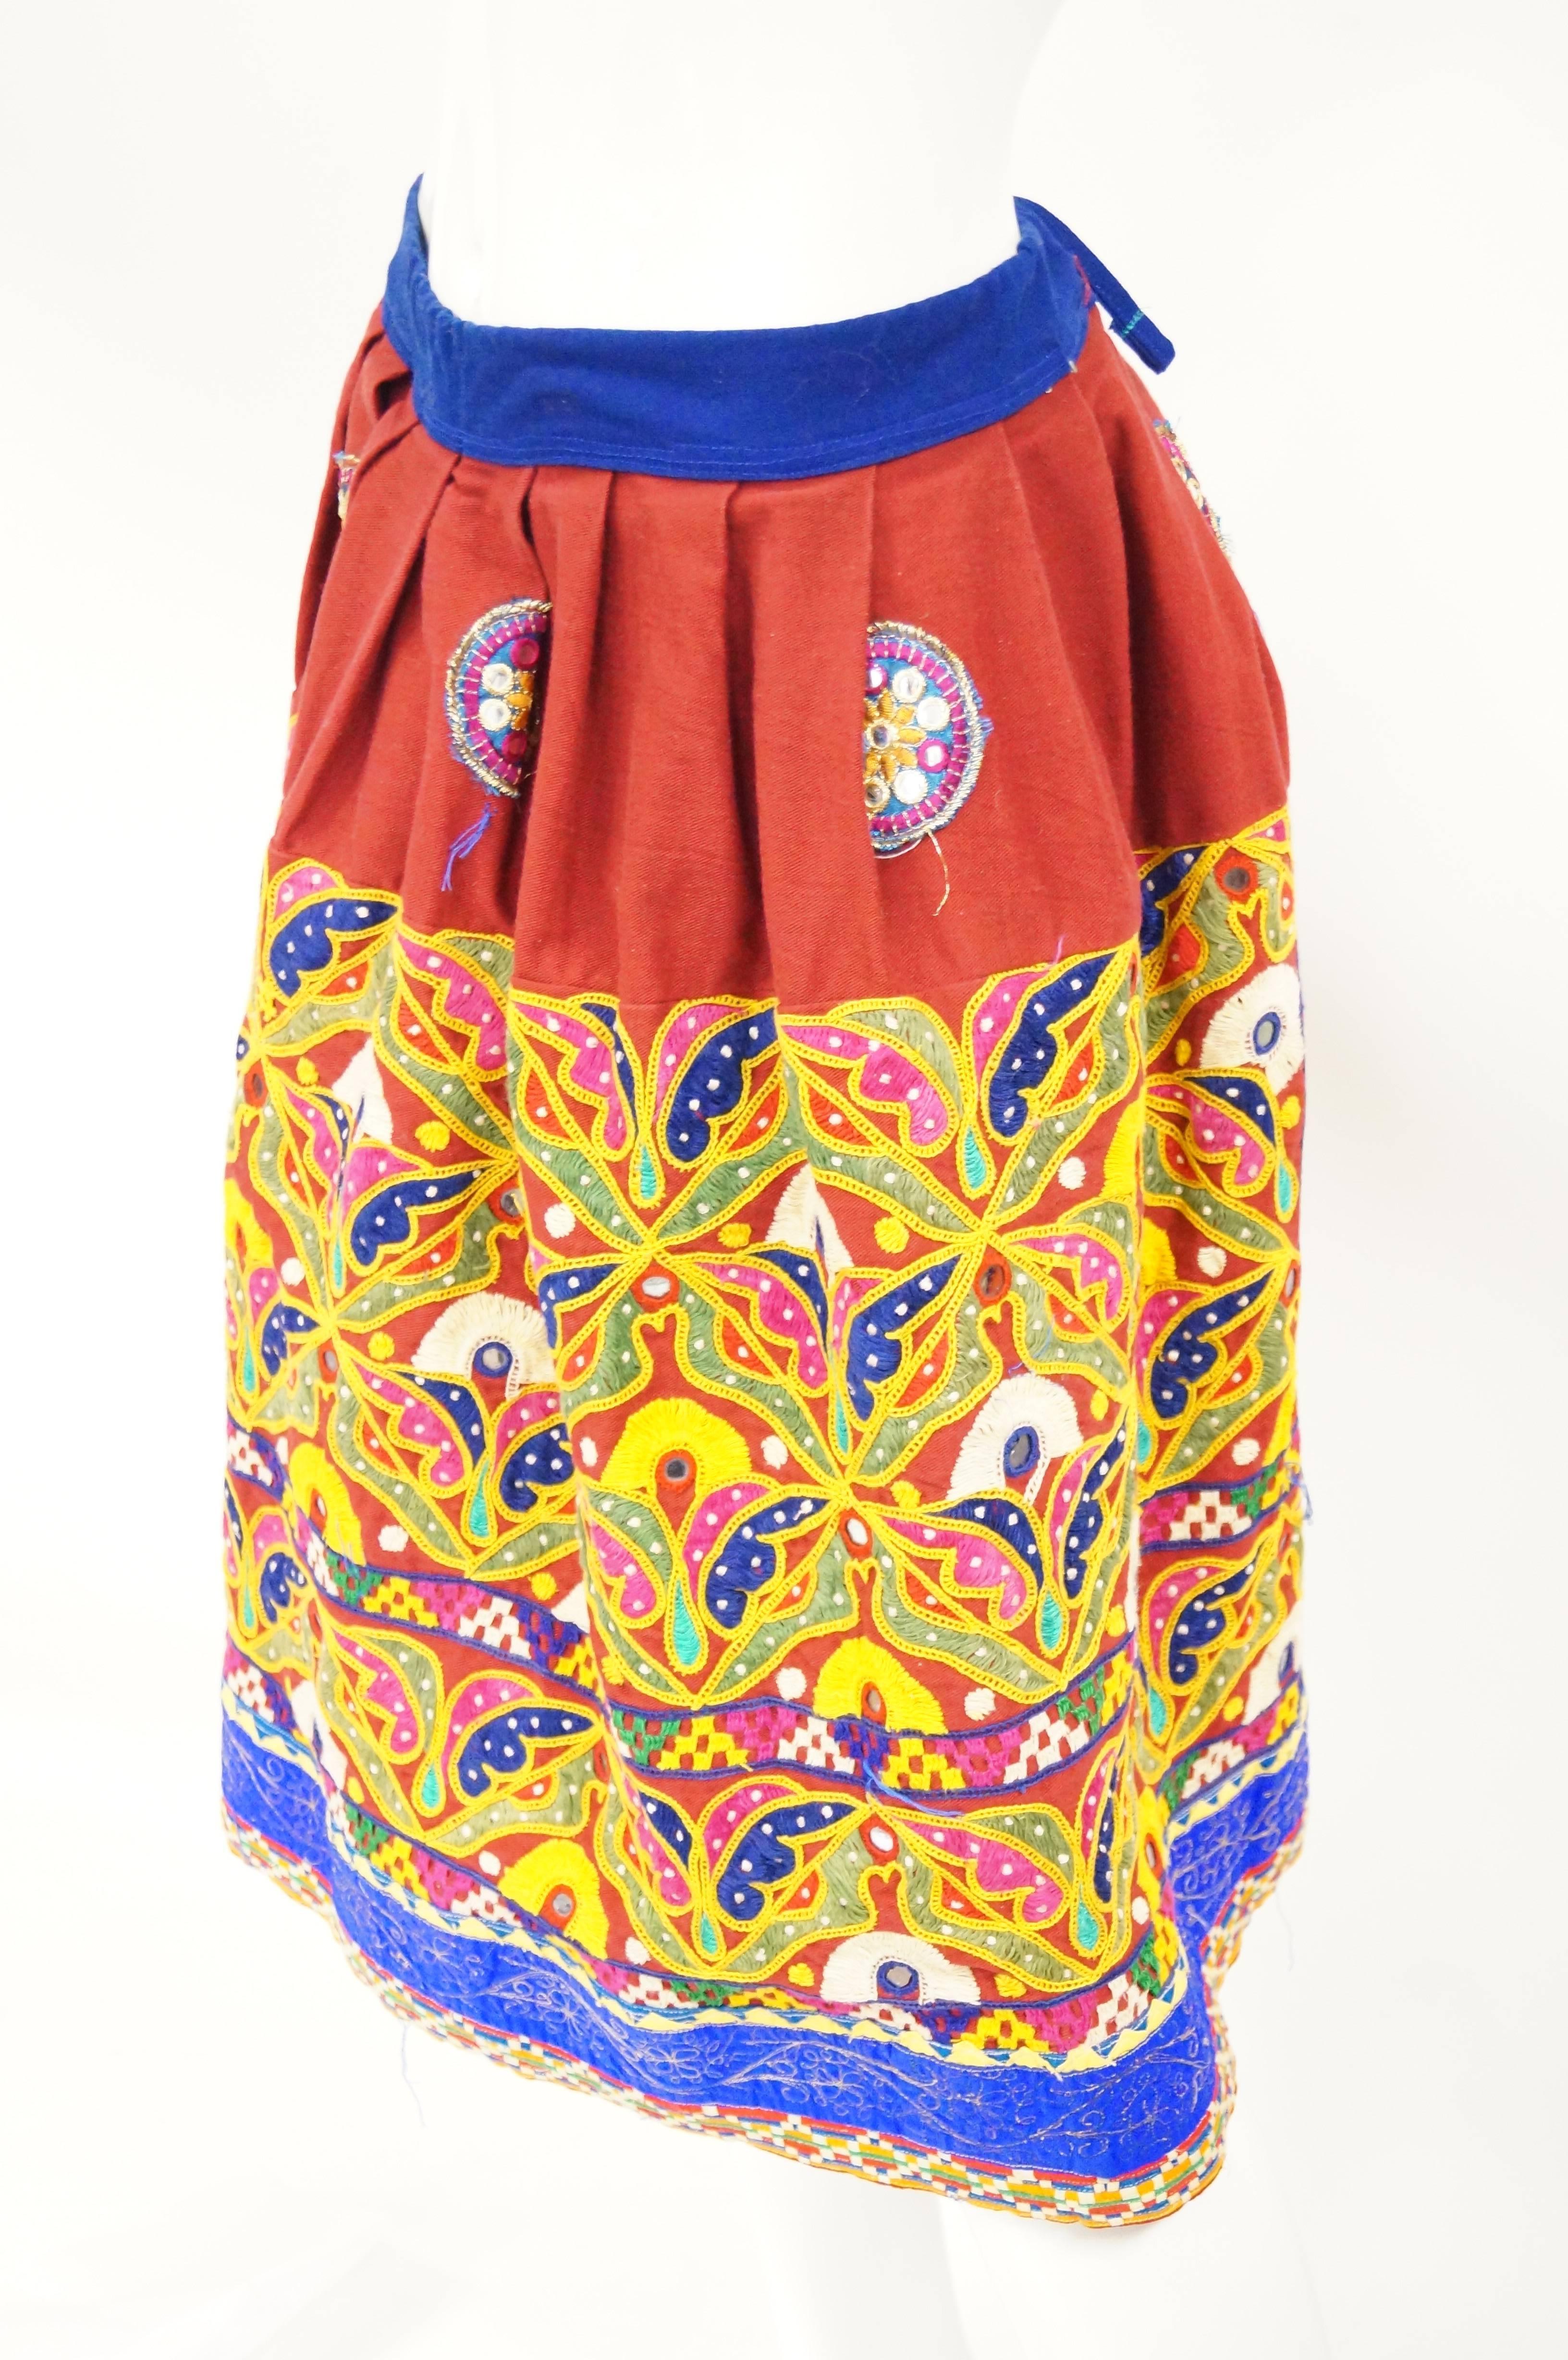 Bright red, yellow, and blue skirt with organic petal-like embroidery. The skirt is voluminous and features mirror work sequins as part of the embroidery.  Dress it up or dress it down!  